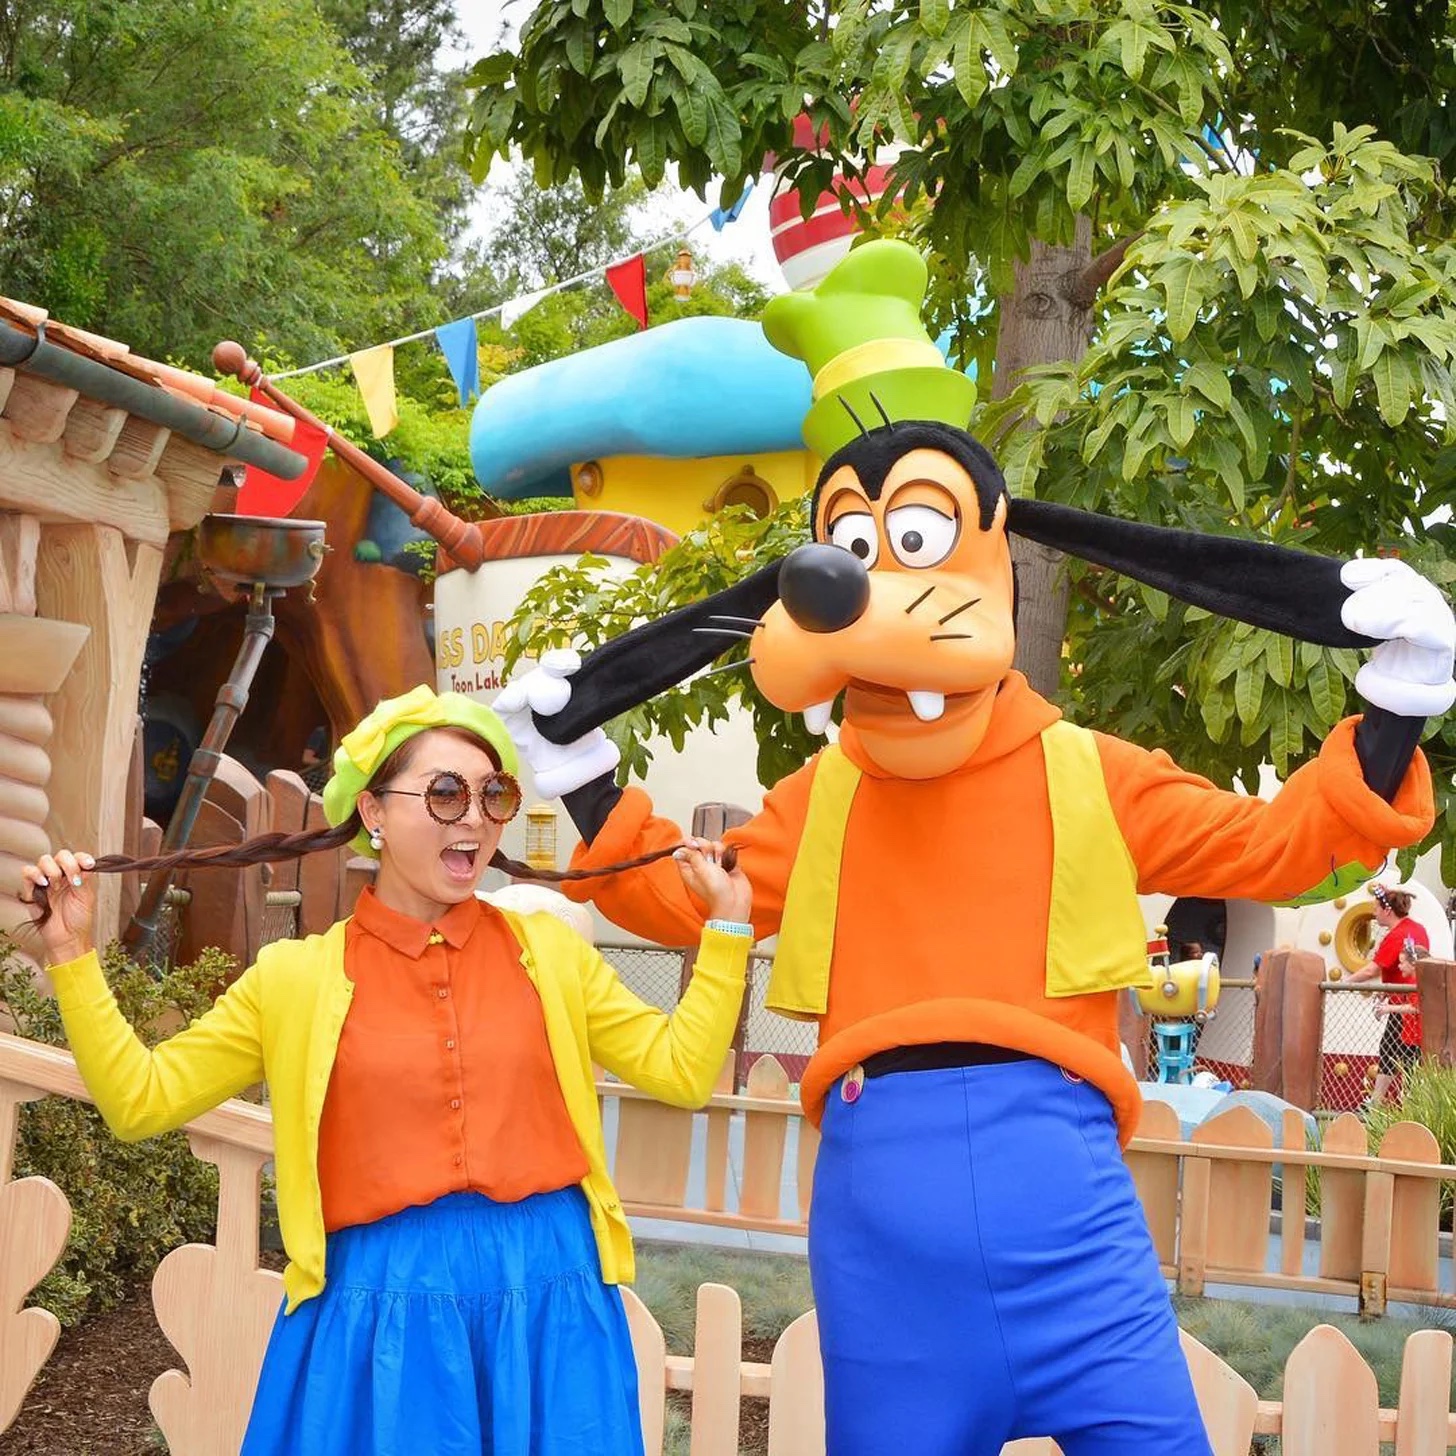 A Disneybounder dressed as Goofy standing next to Goofy. 